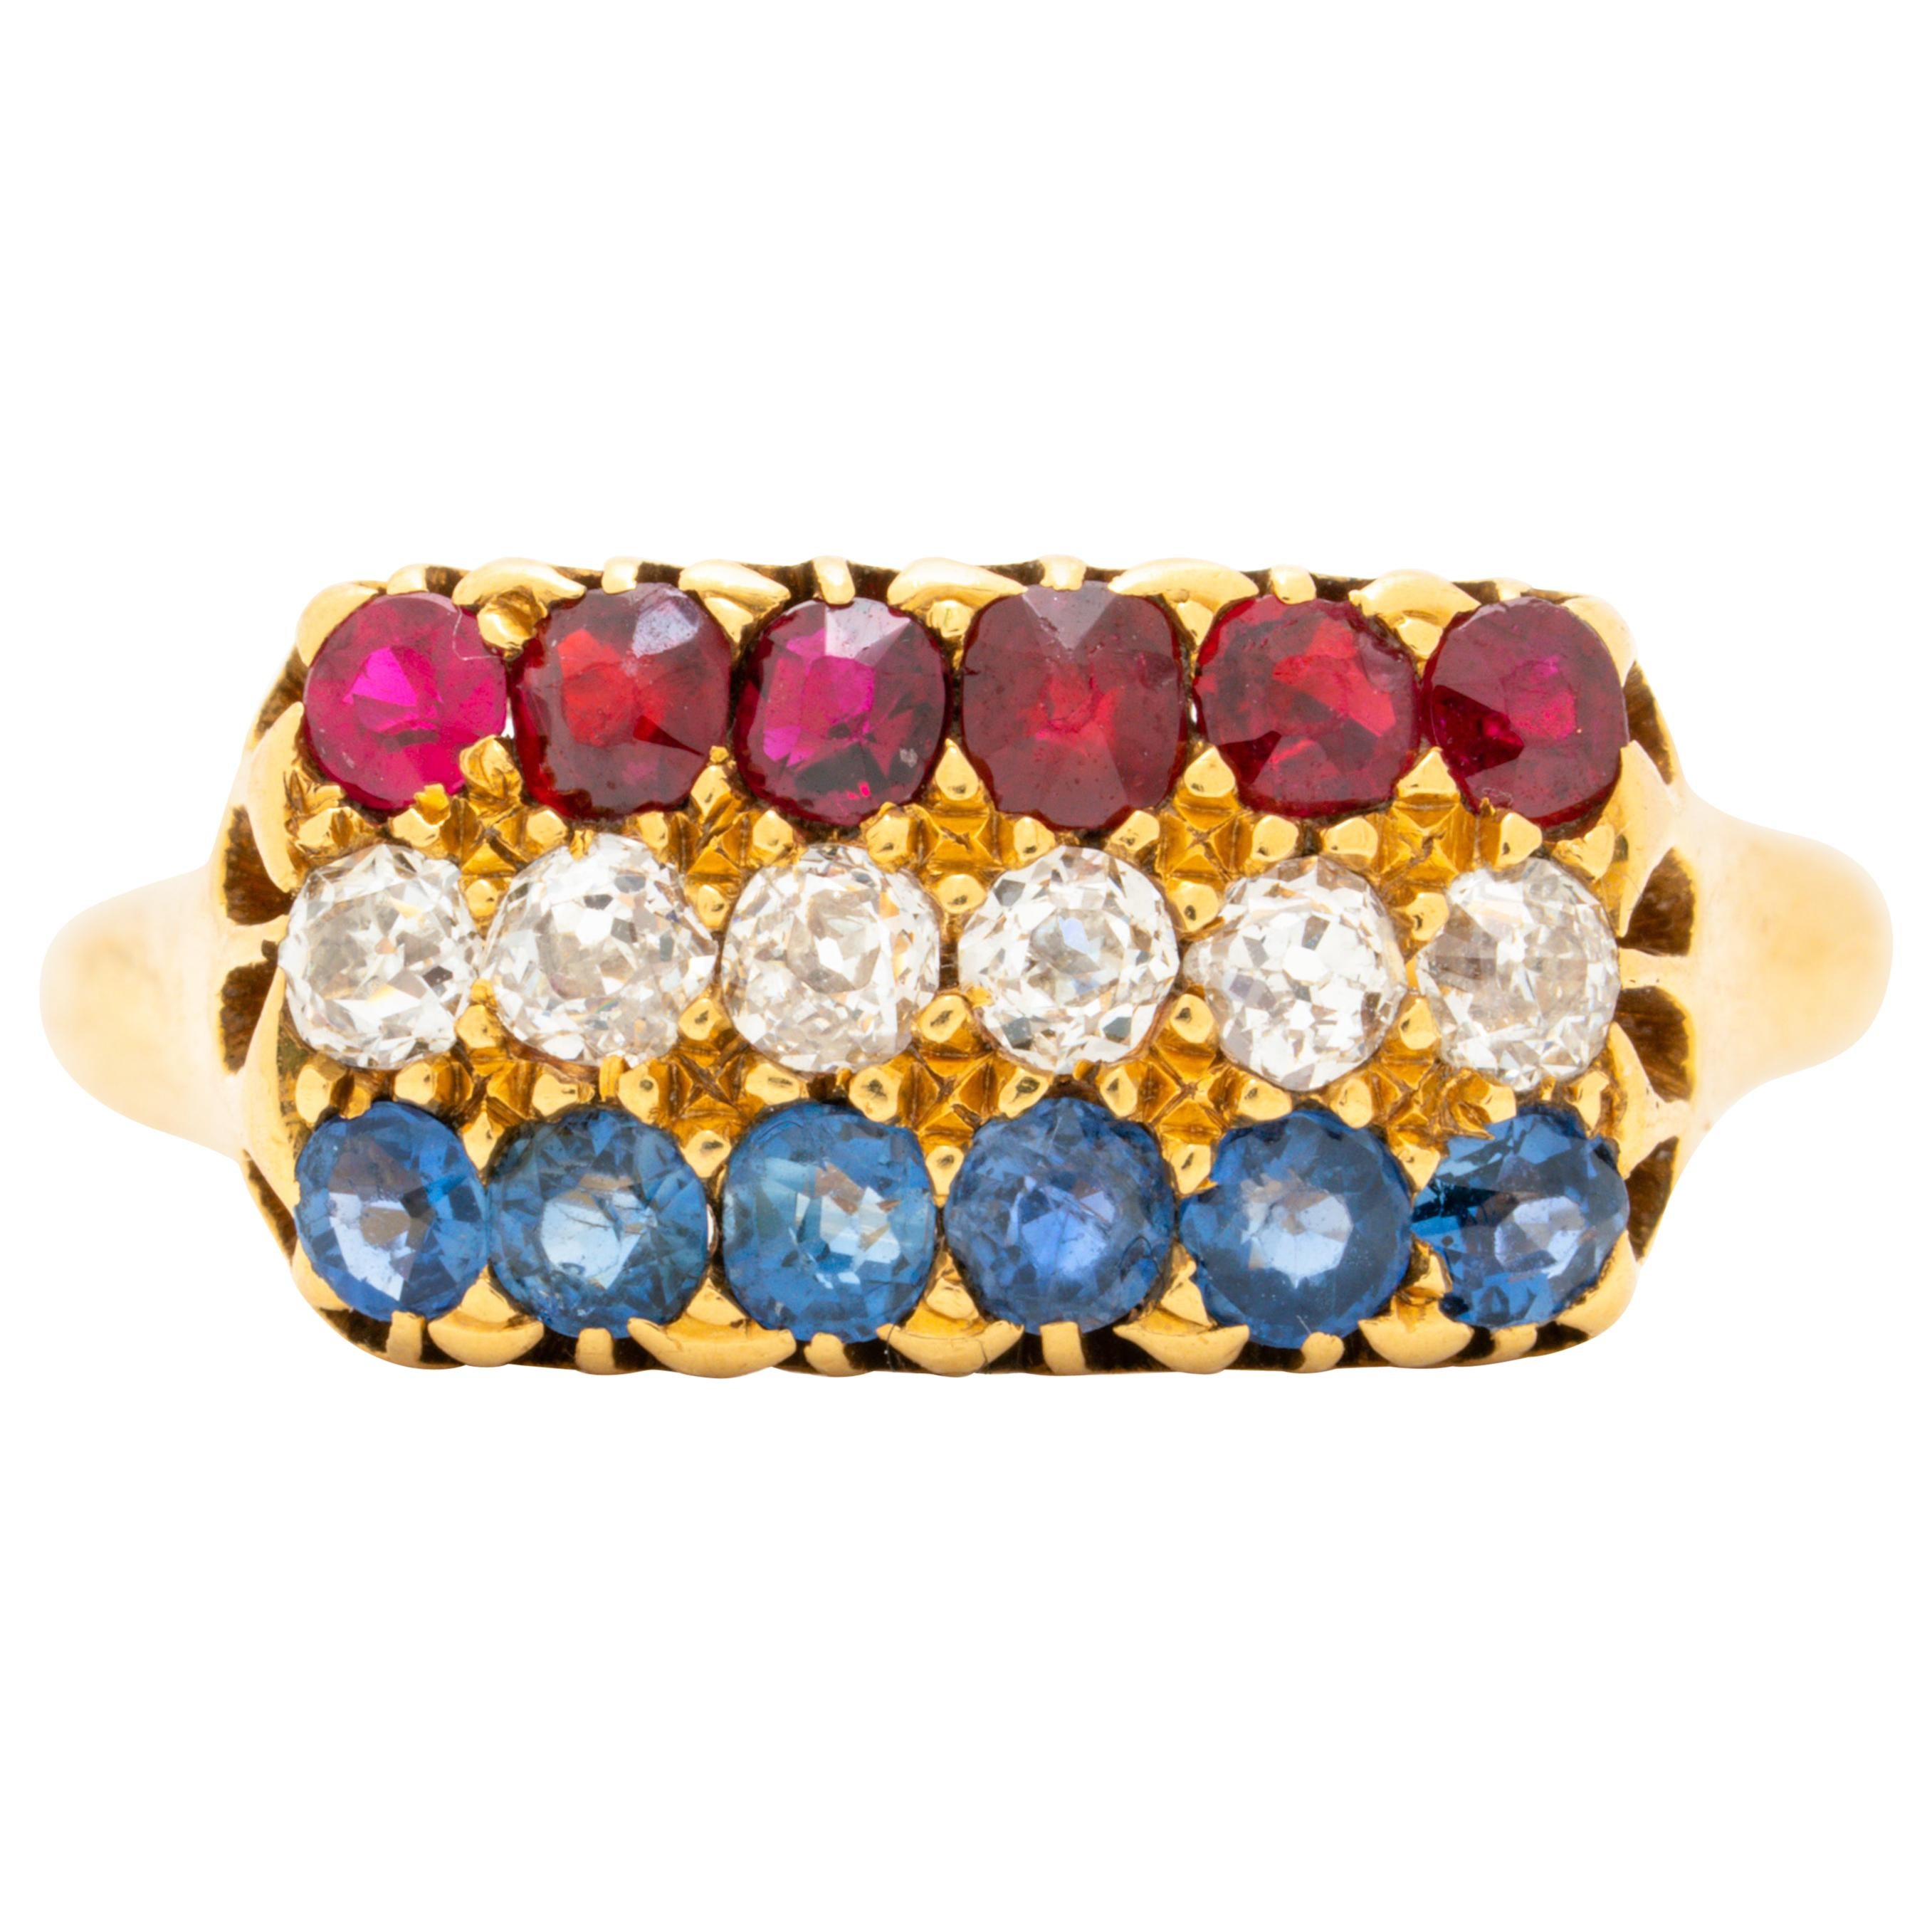 Antique French 18 Karat Yellow Gold, Ruby and Sapphire Row Ring, circa 1880